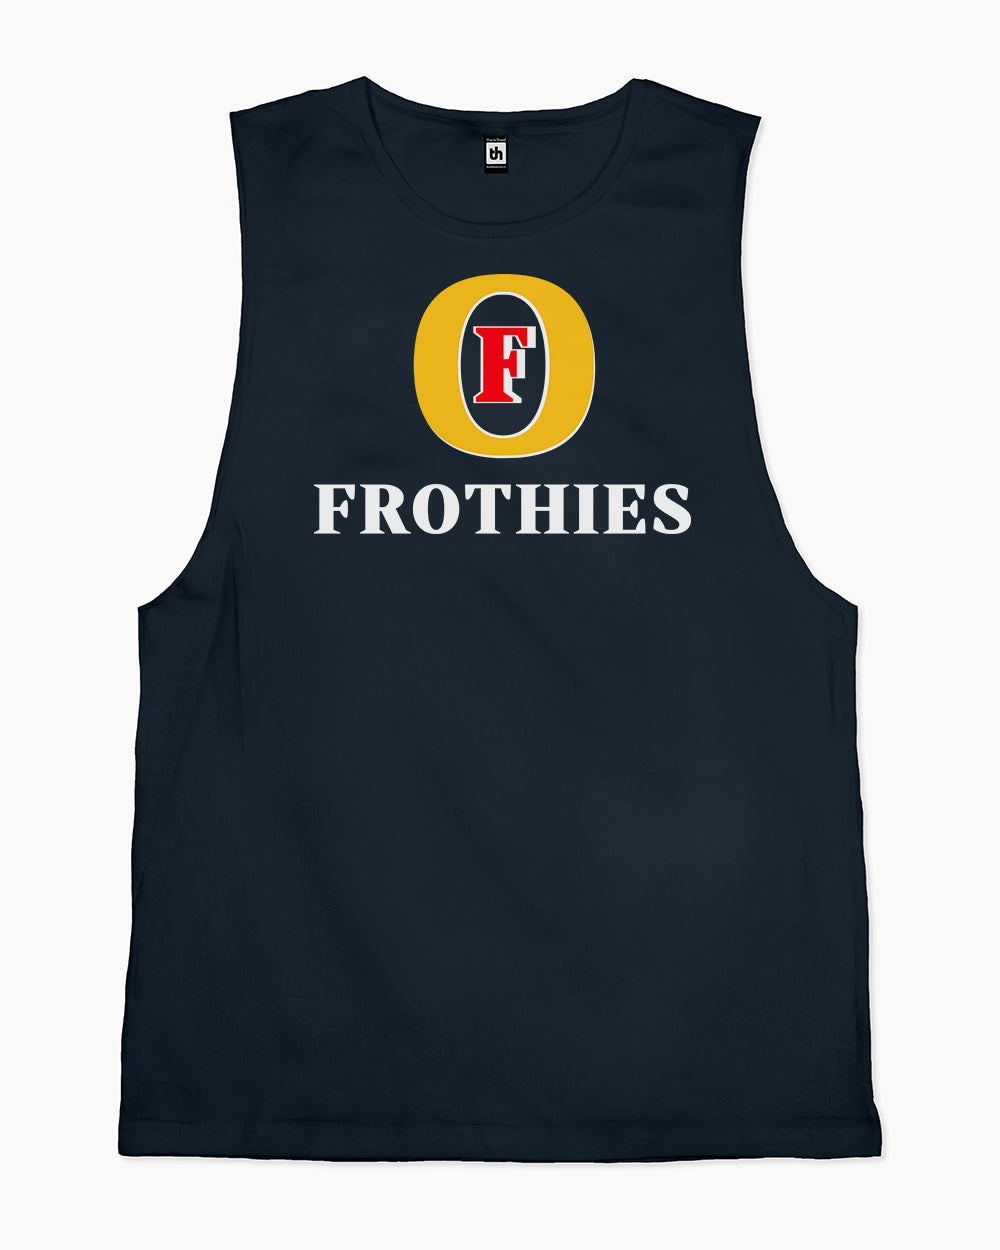 Frothies